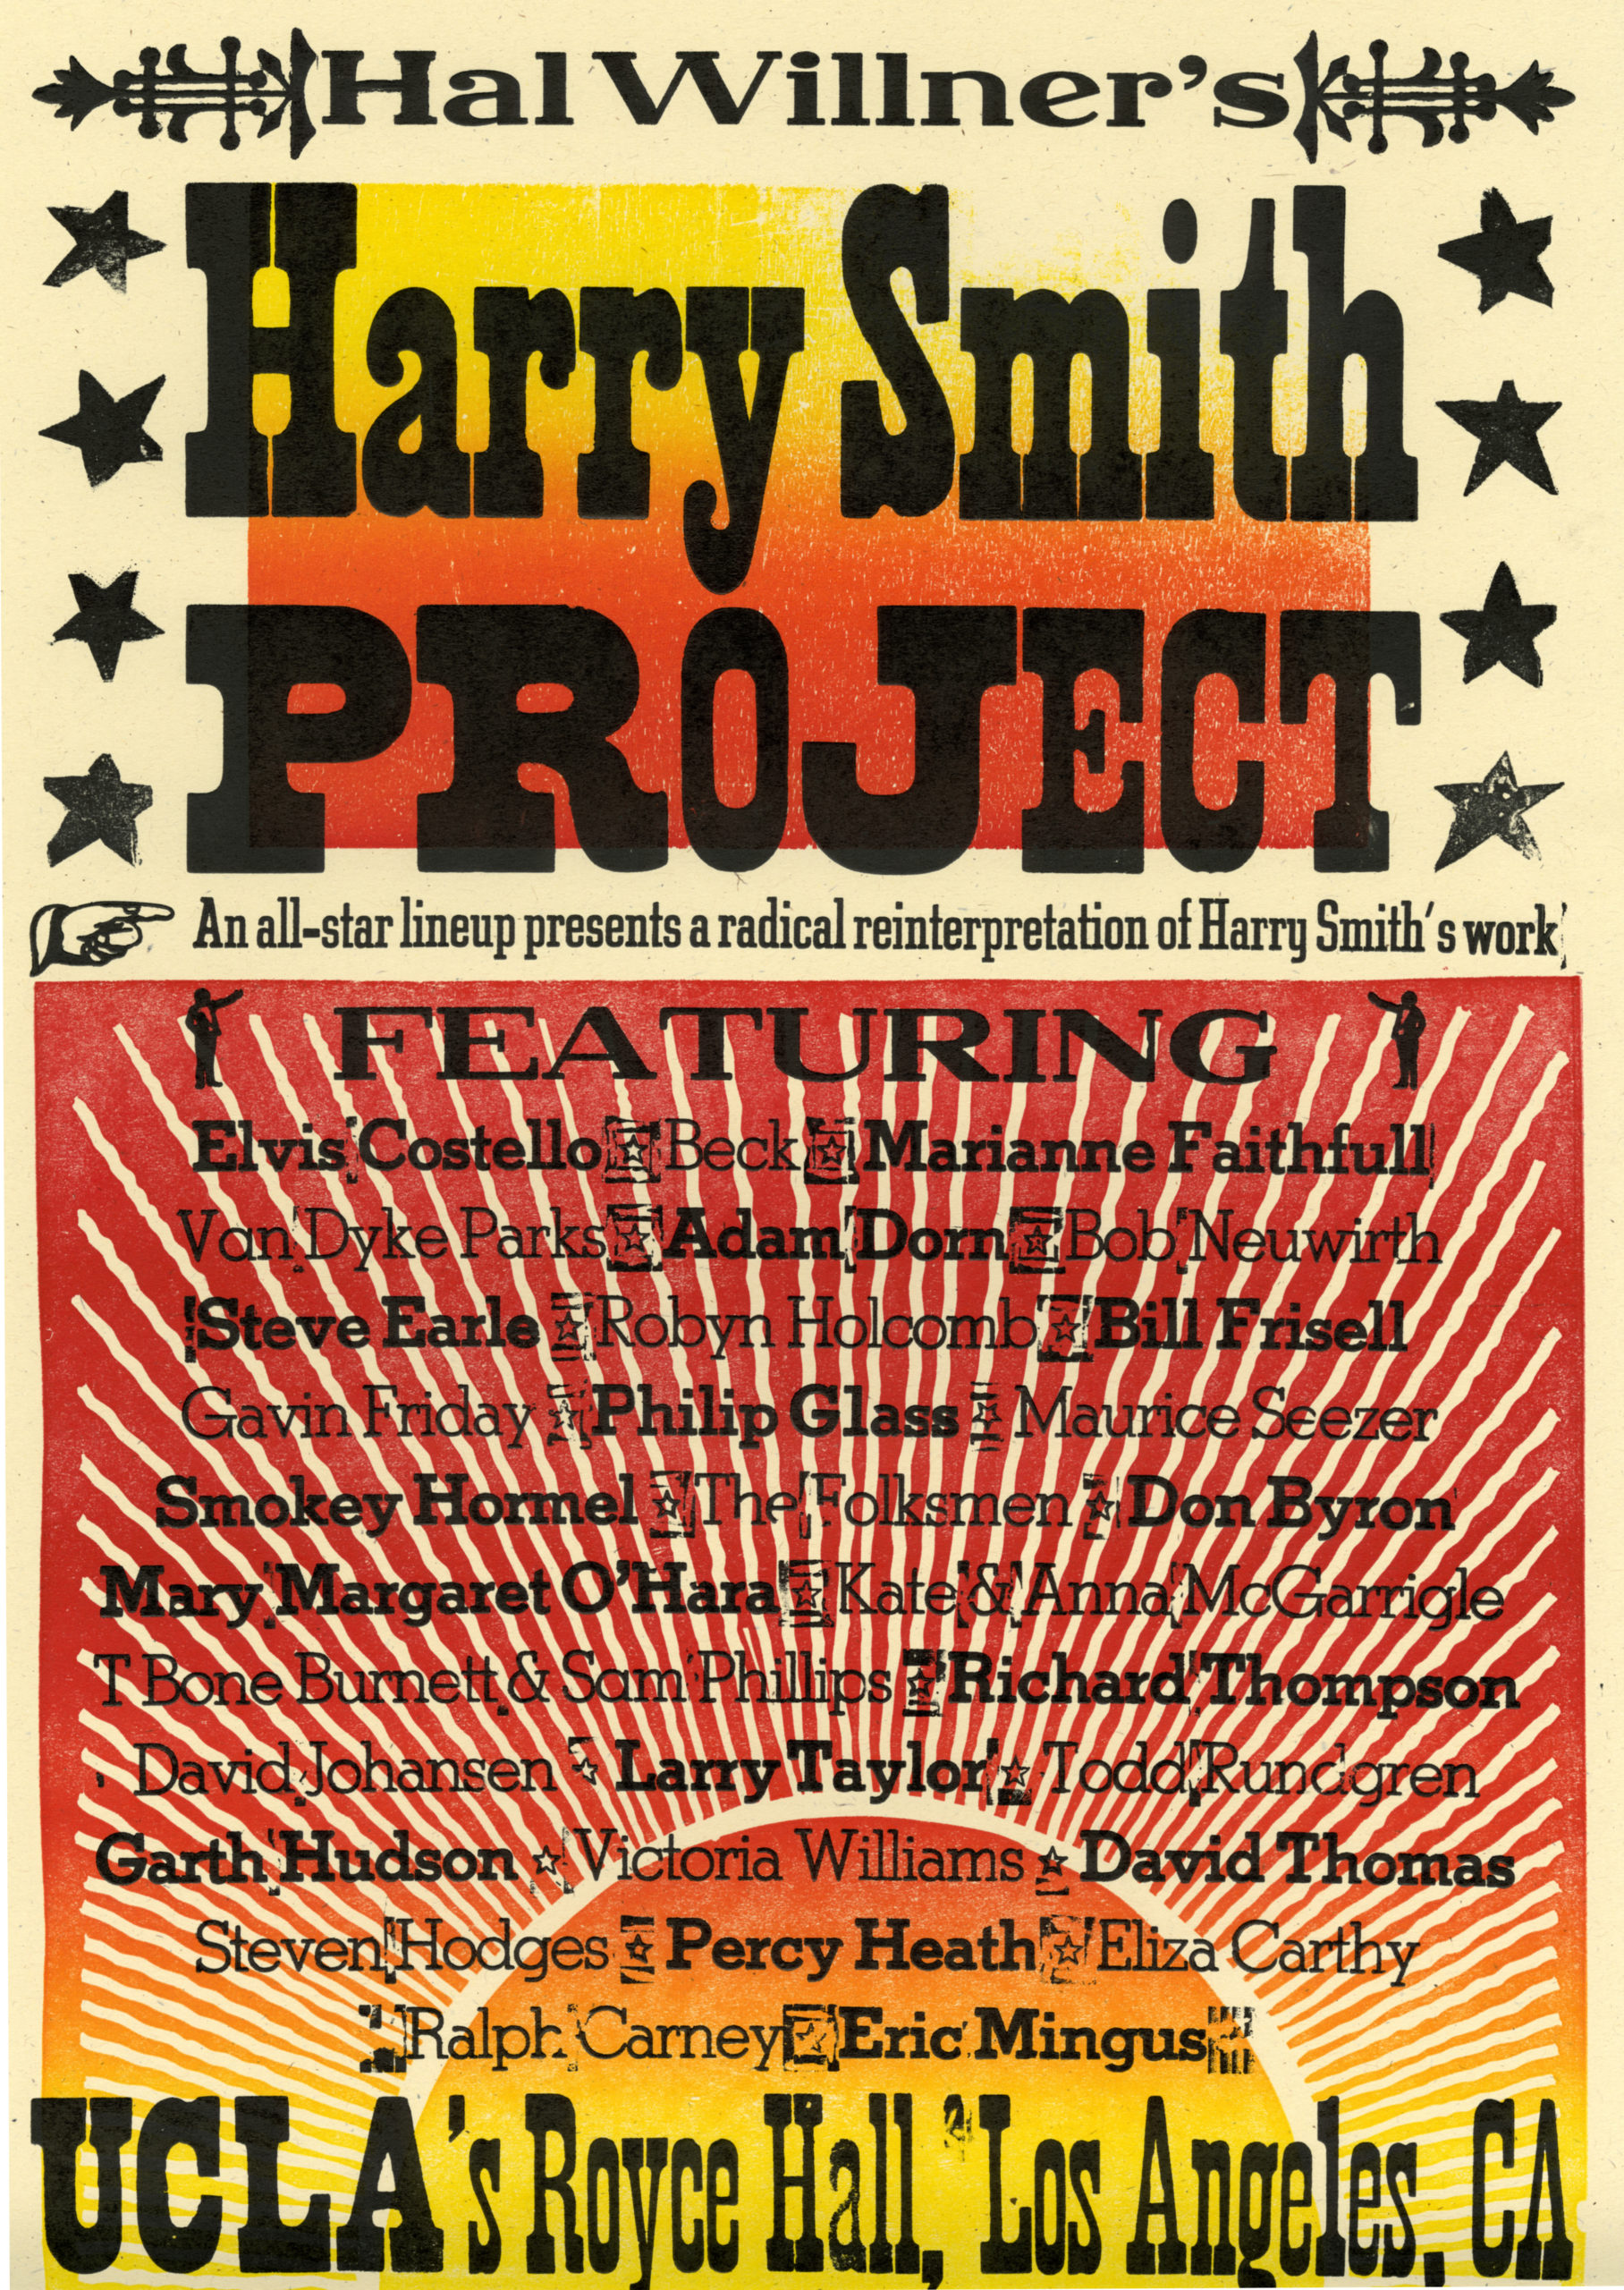 Release: Harry Smith Project and The Old Weird America now available on Amazon Prime and Apple TV!